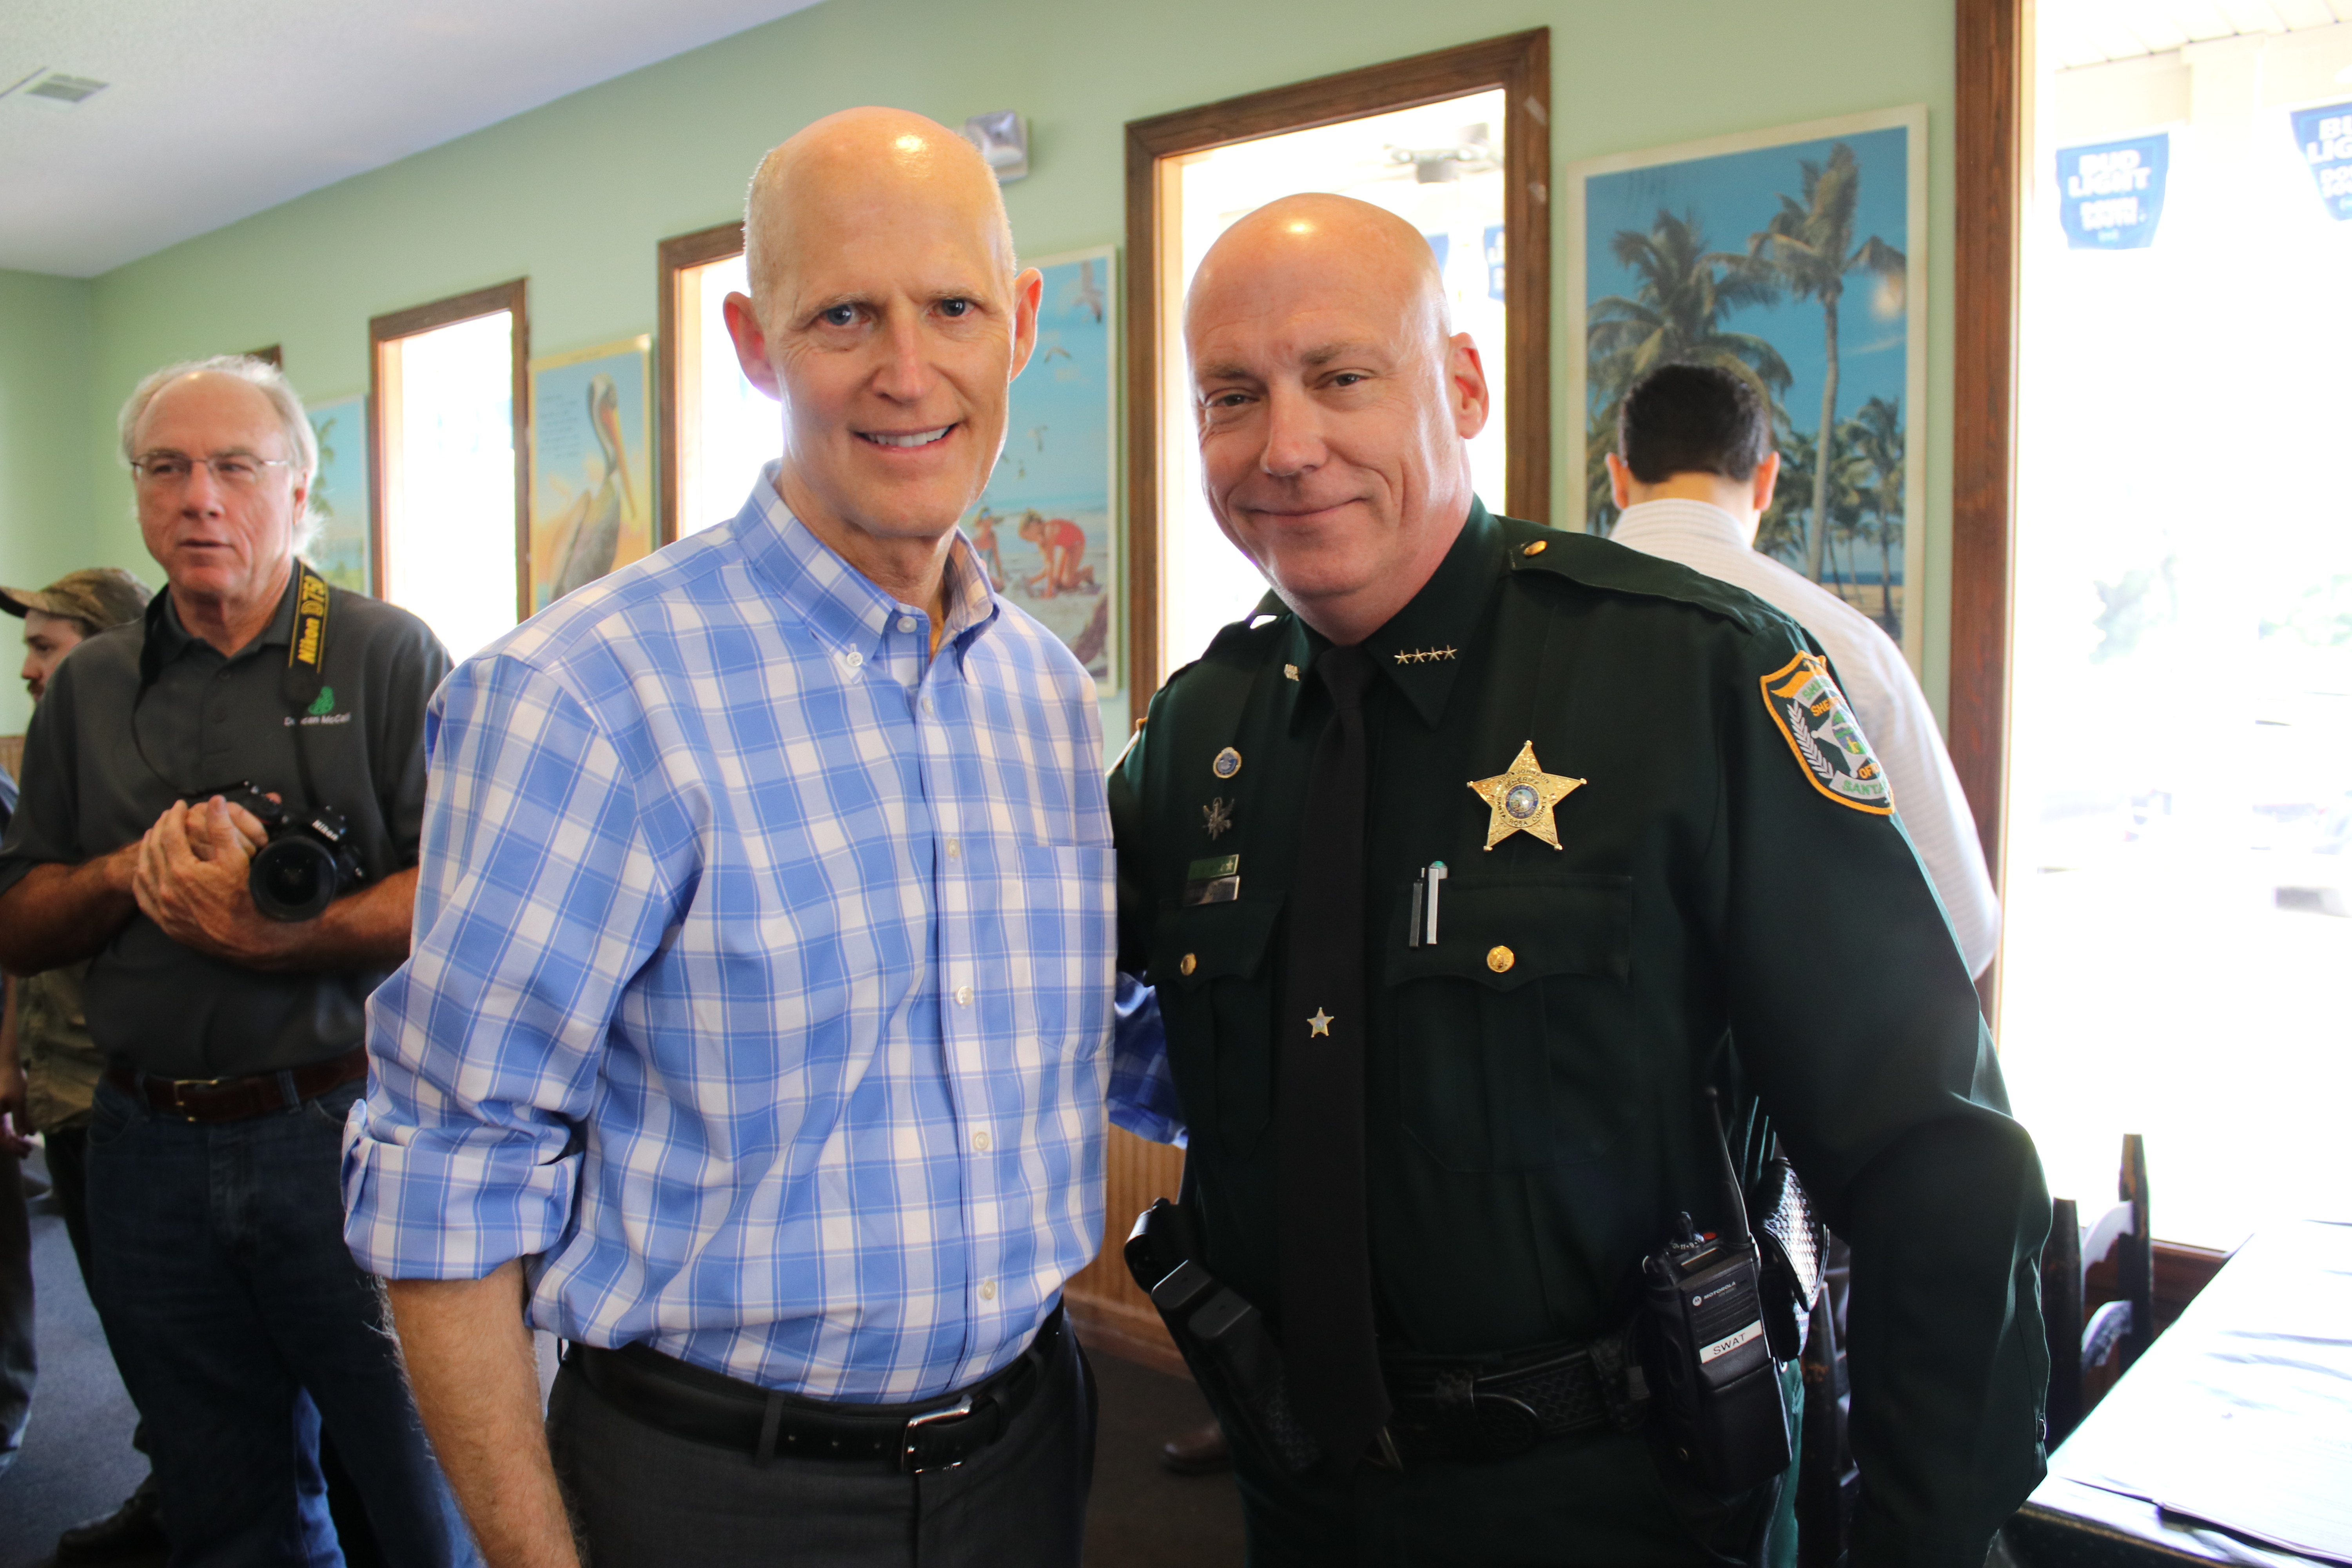 Two men, one in a blue plaid shirt and the other in a green sheriff's uniform, pose together smiling in a room with onlookers.